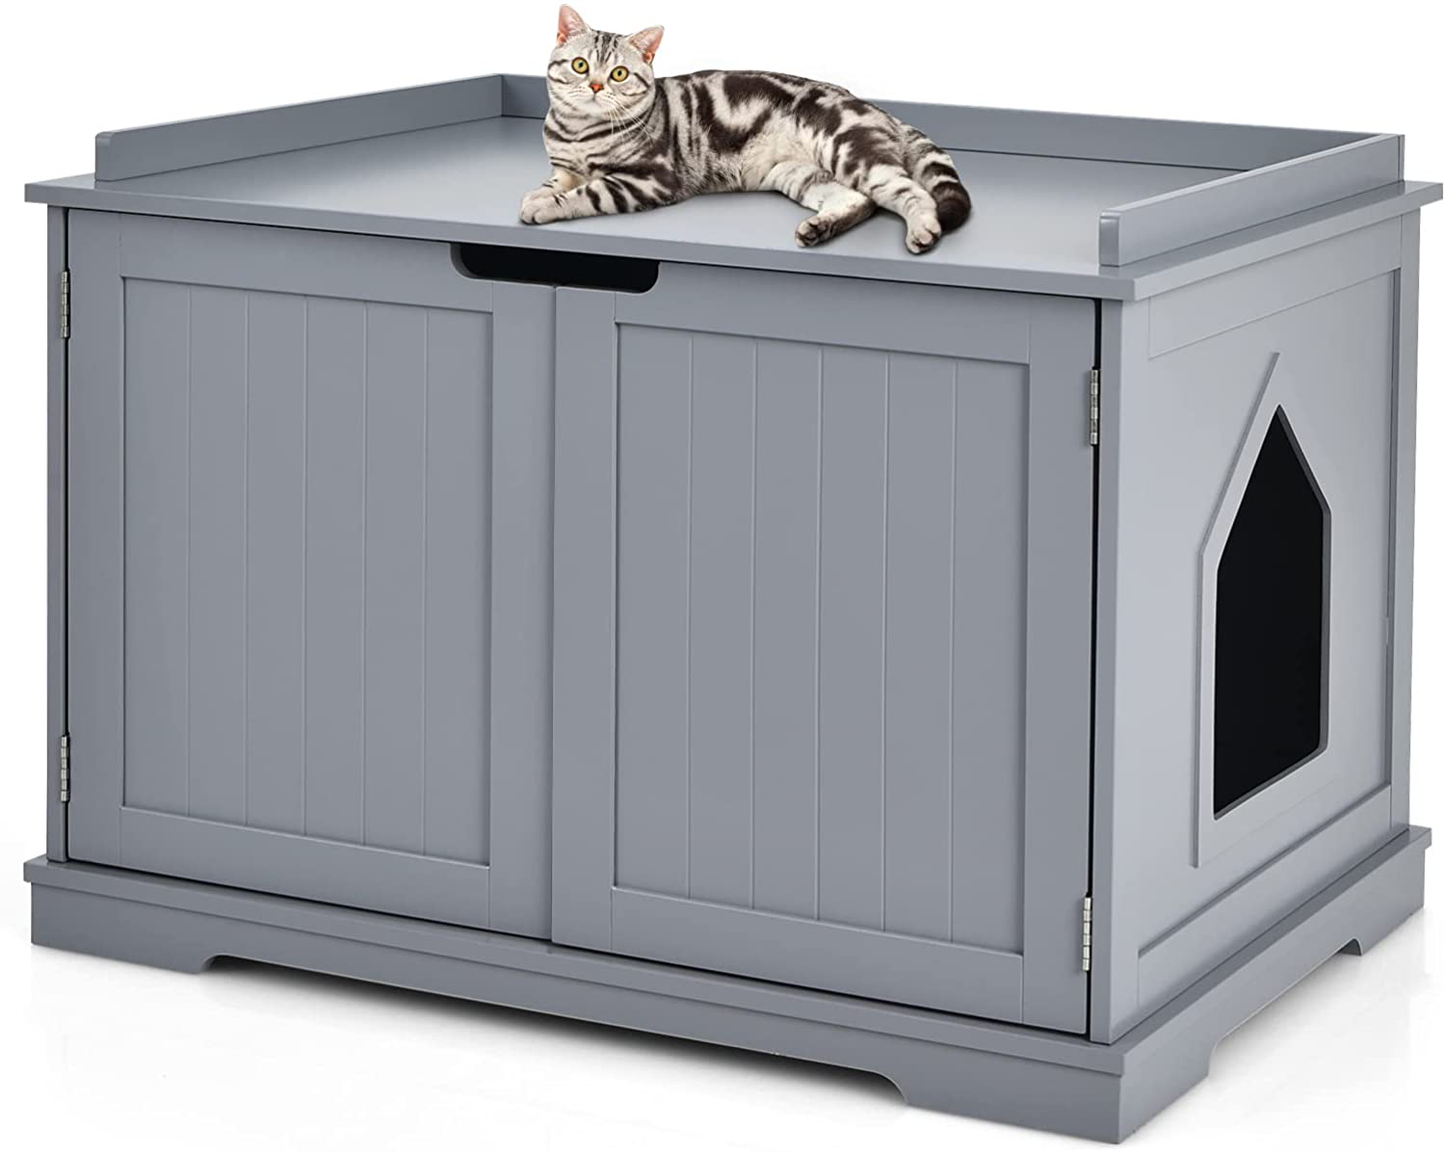 Tangkula Litter Box Enclosure, Cat Litter Box Furniture Hidden, Nightstand Pet House with Double Doors, Indoor Decorative Cat House, Cat Washroom Storage Bench for Large Cat Kitty Animals & Pet Supplies > Pet Supplies > Cat Supplies > Cat Furniture Tangkula Grey  